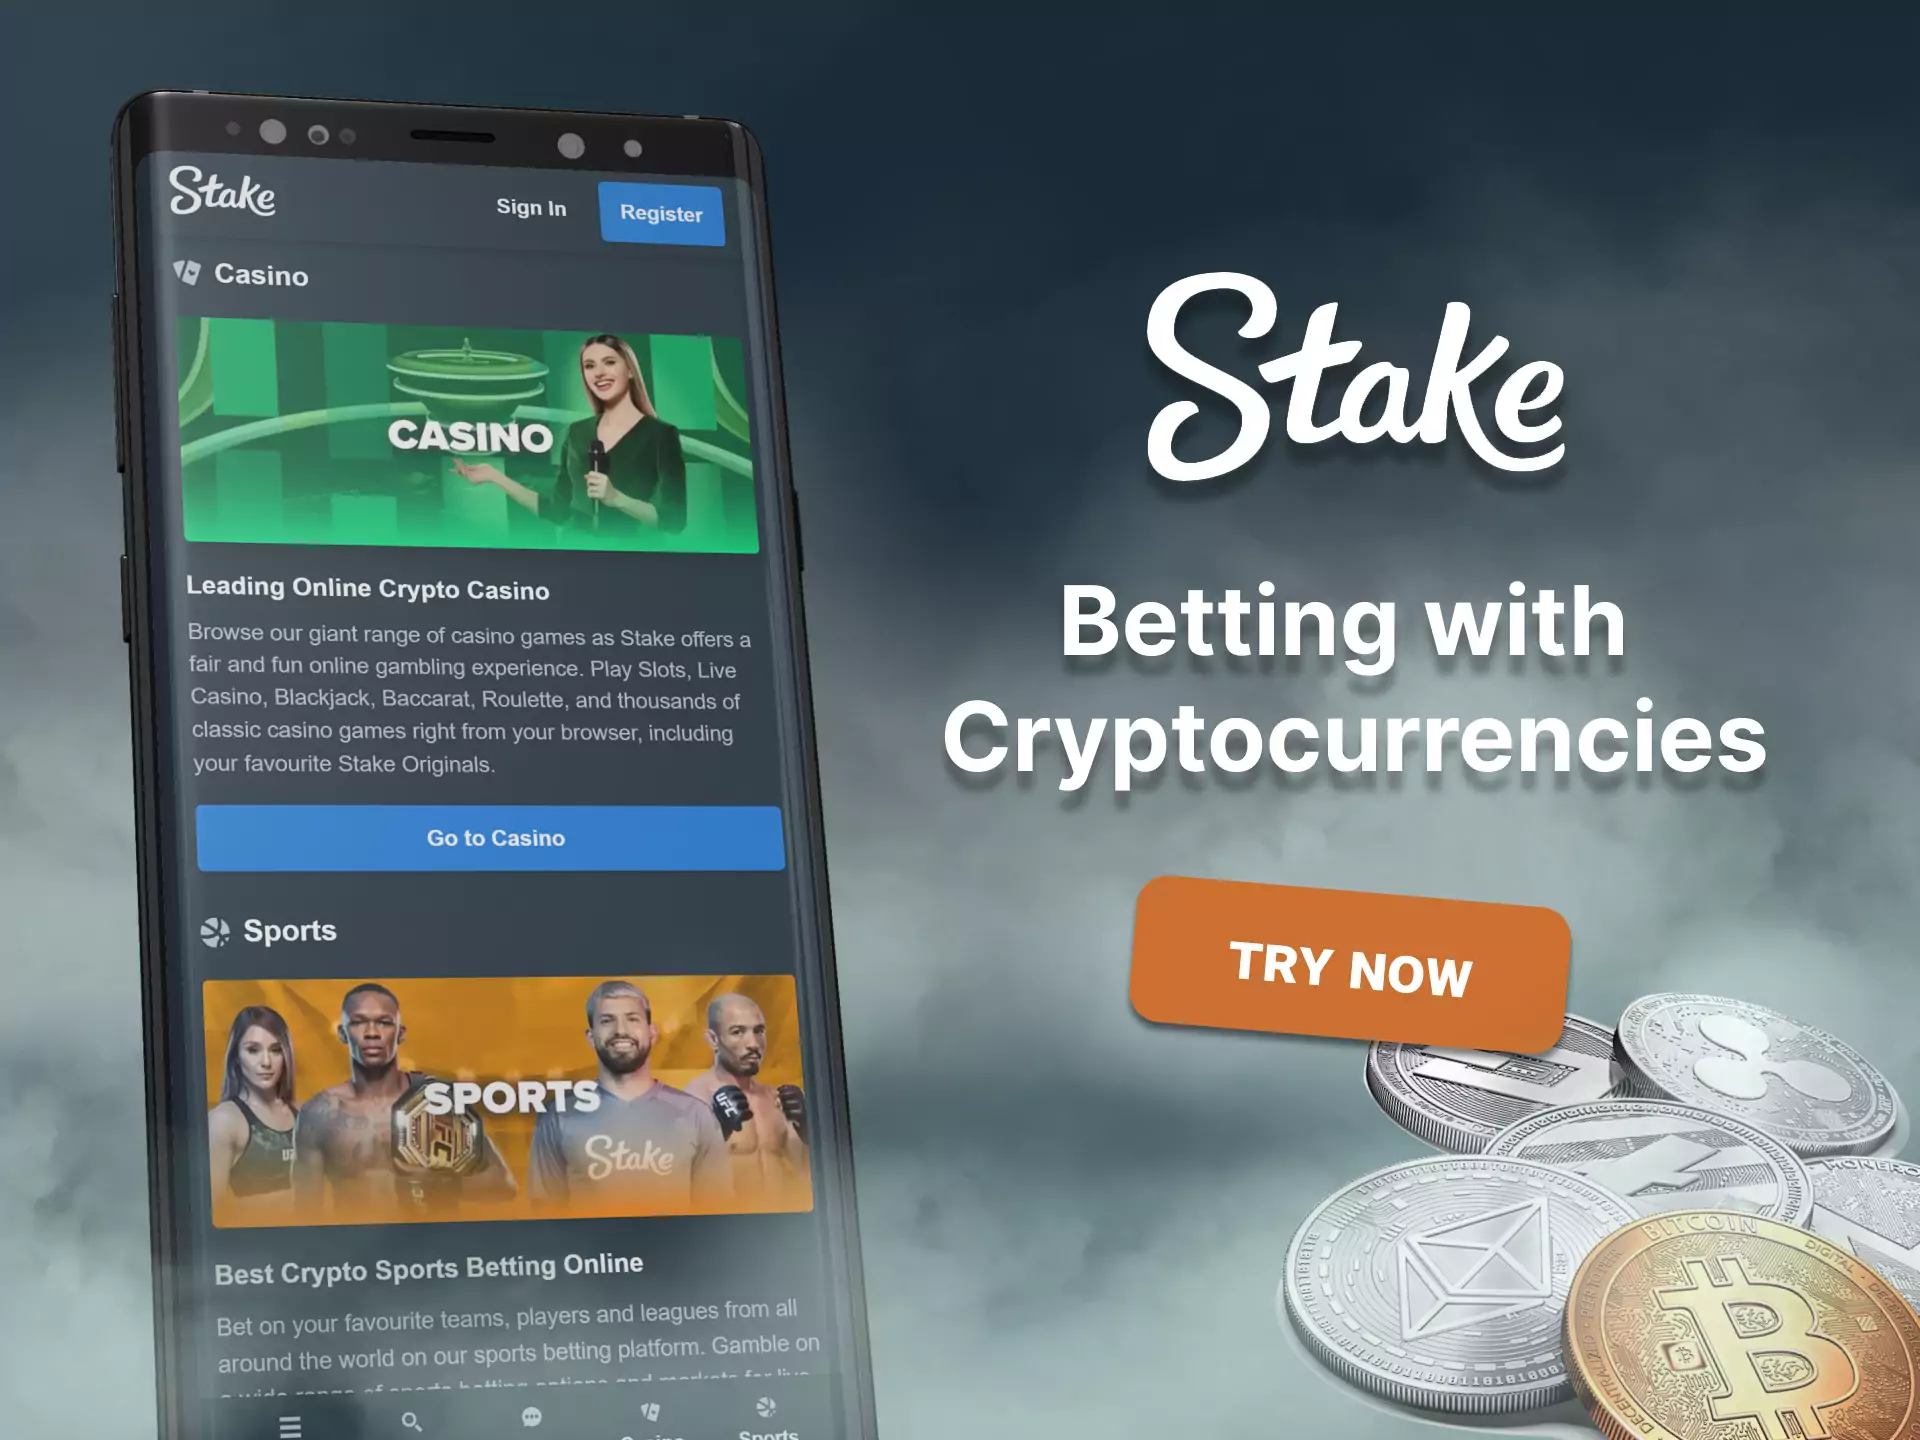 In Stake.com you can bet with cryptocurrencies and get additional benefits.